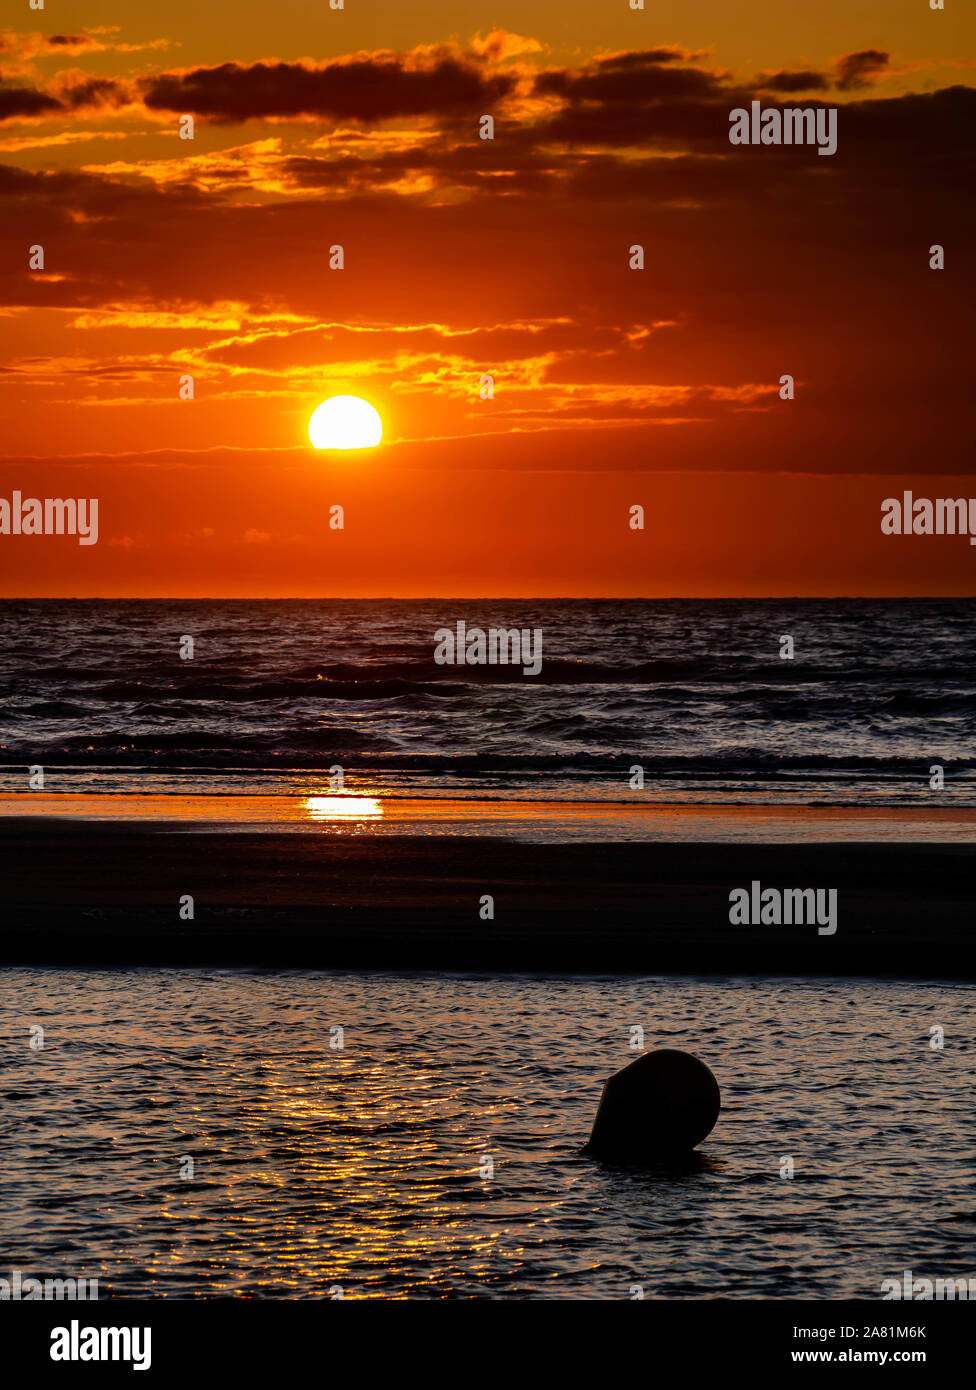 Colorful sunset at the beach with the sun peeking below a cloudlayer and a buoy at the foreground Stock Photo